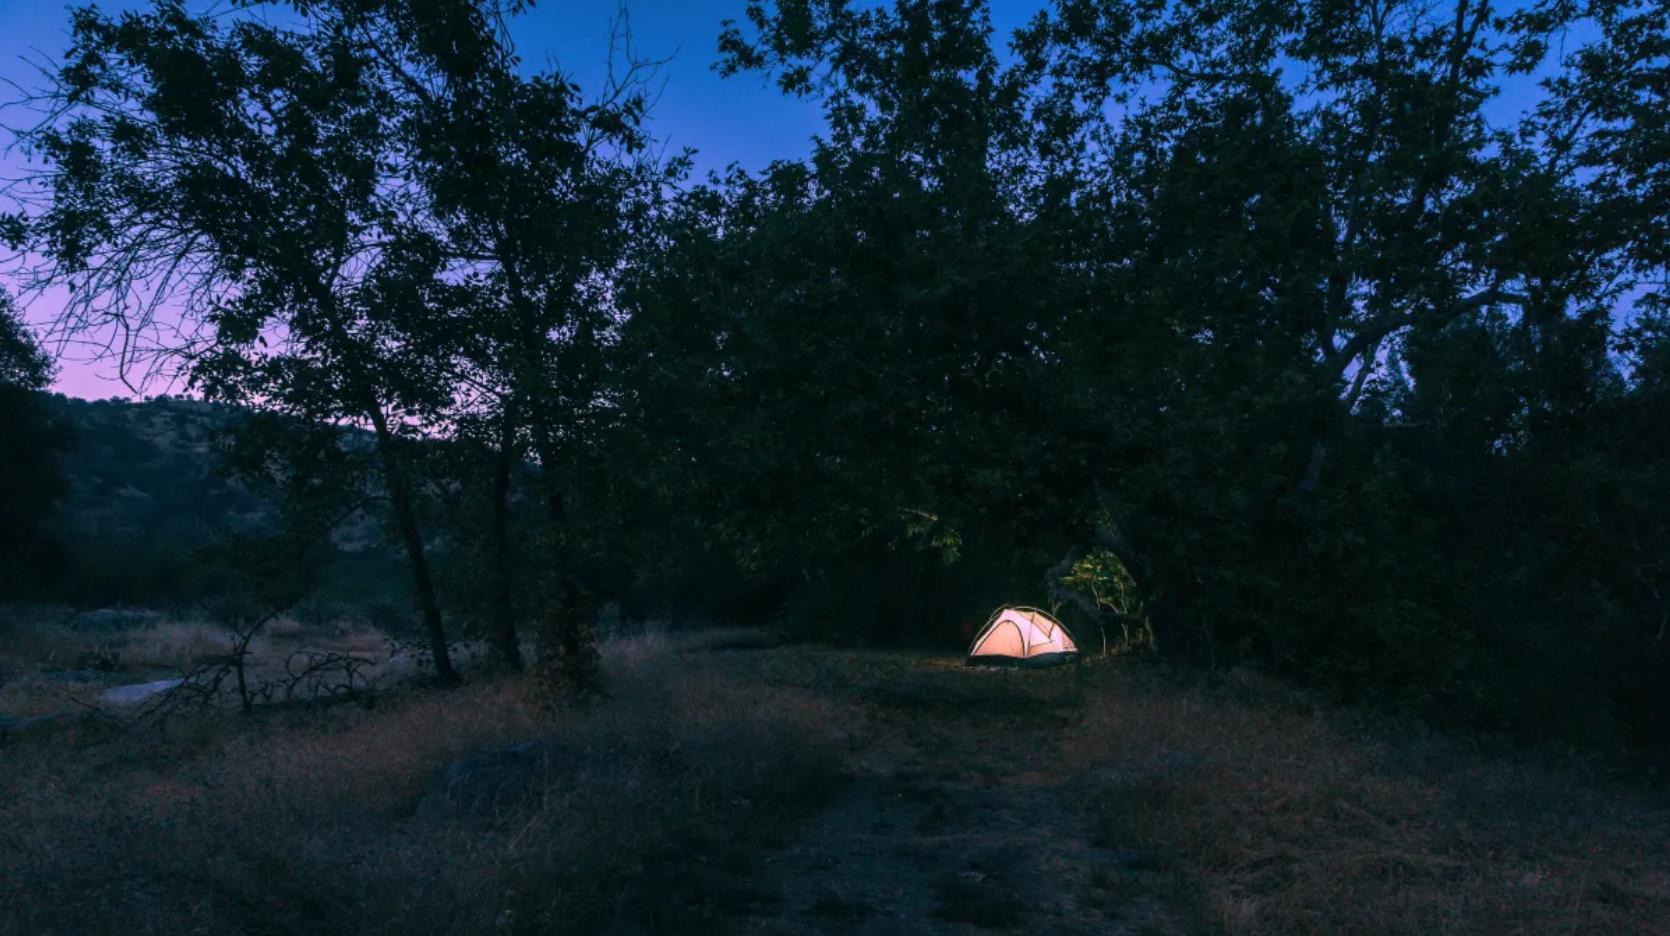 Another campsite at night (Copy)